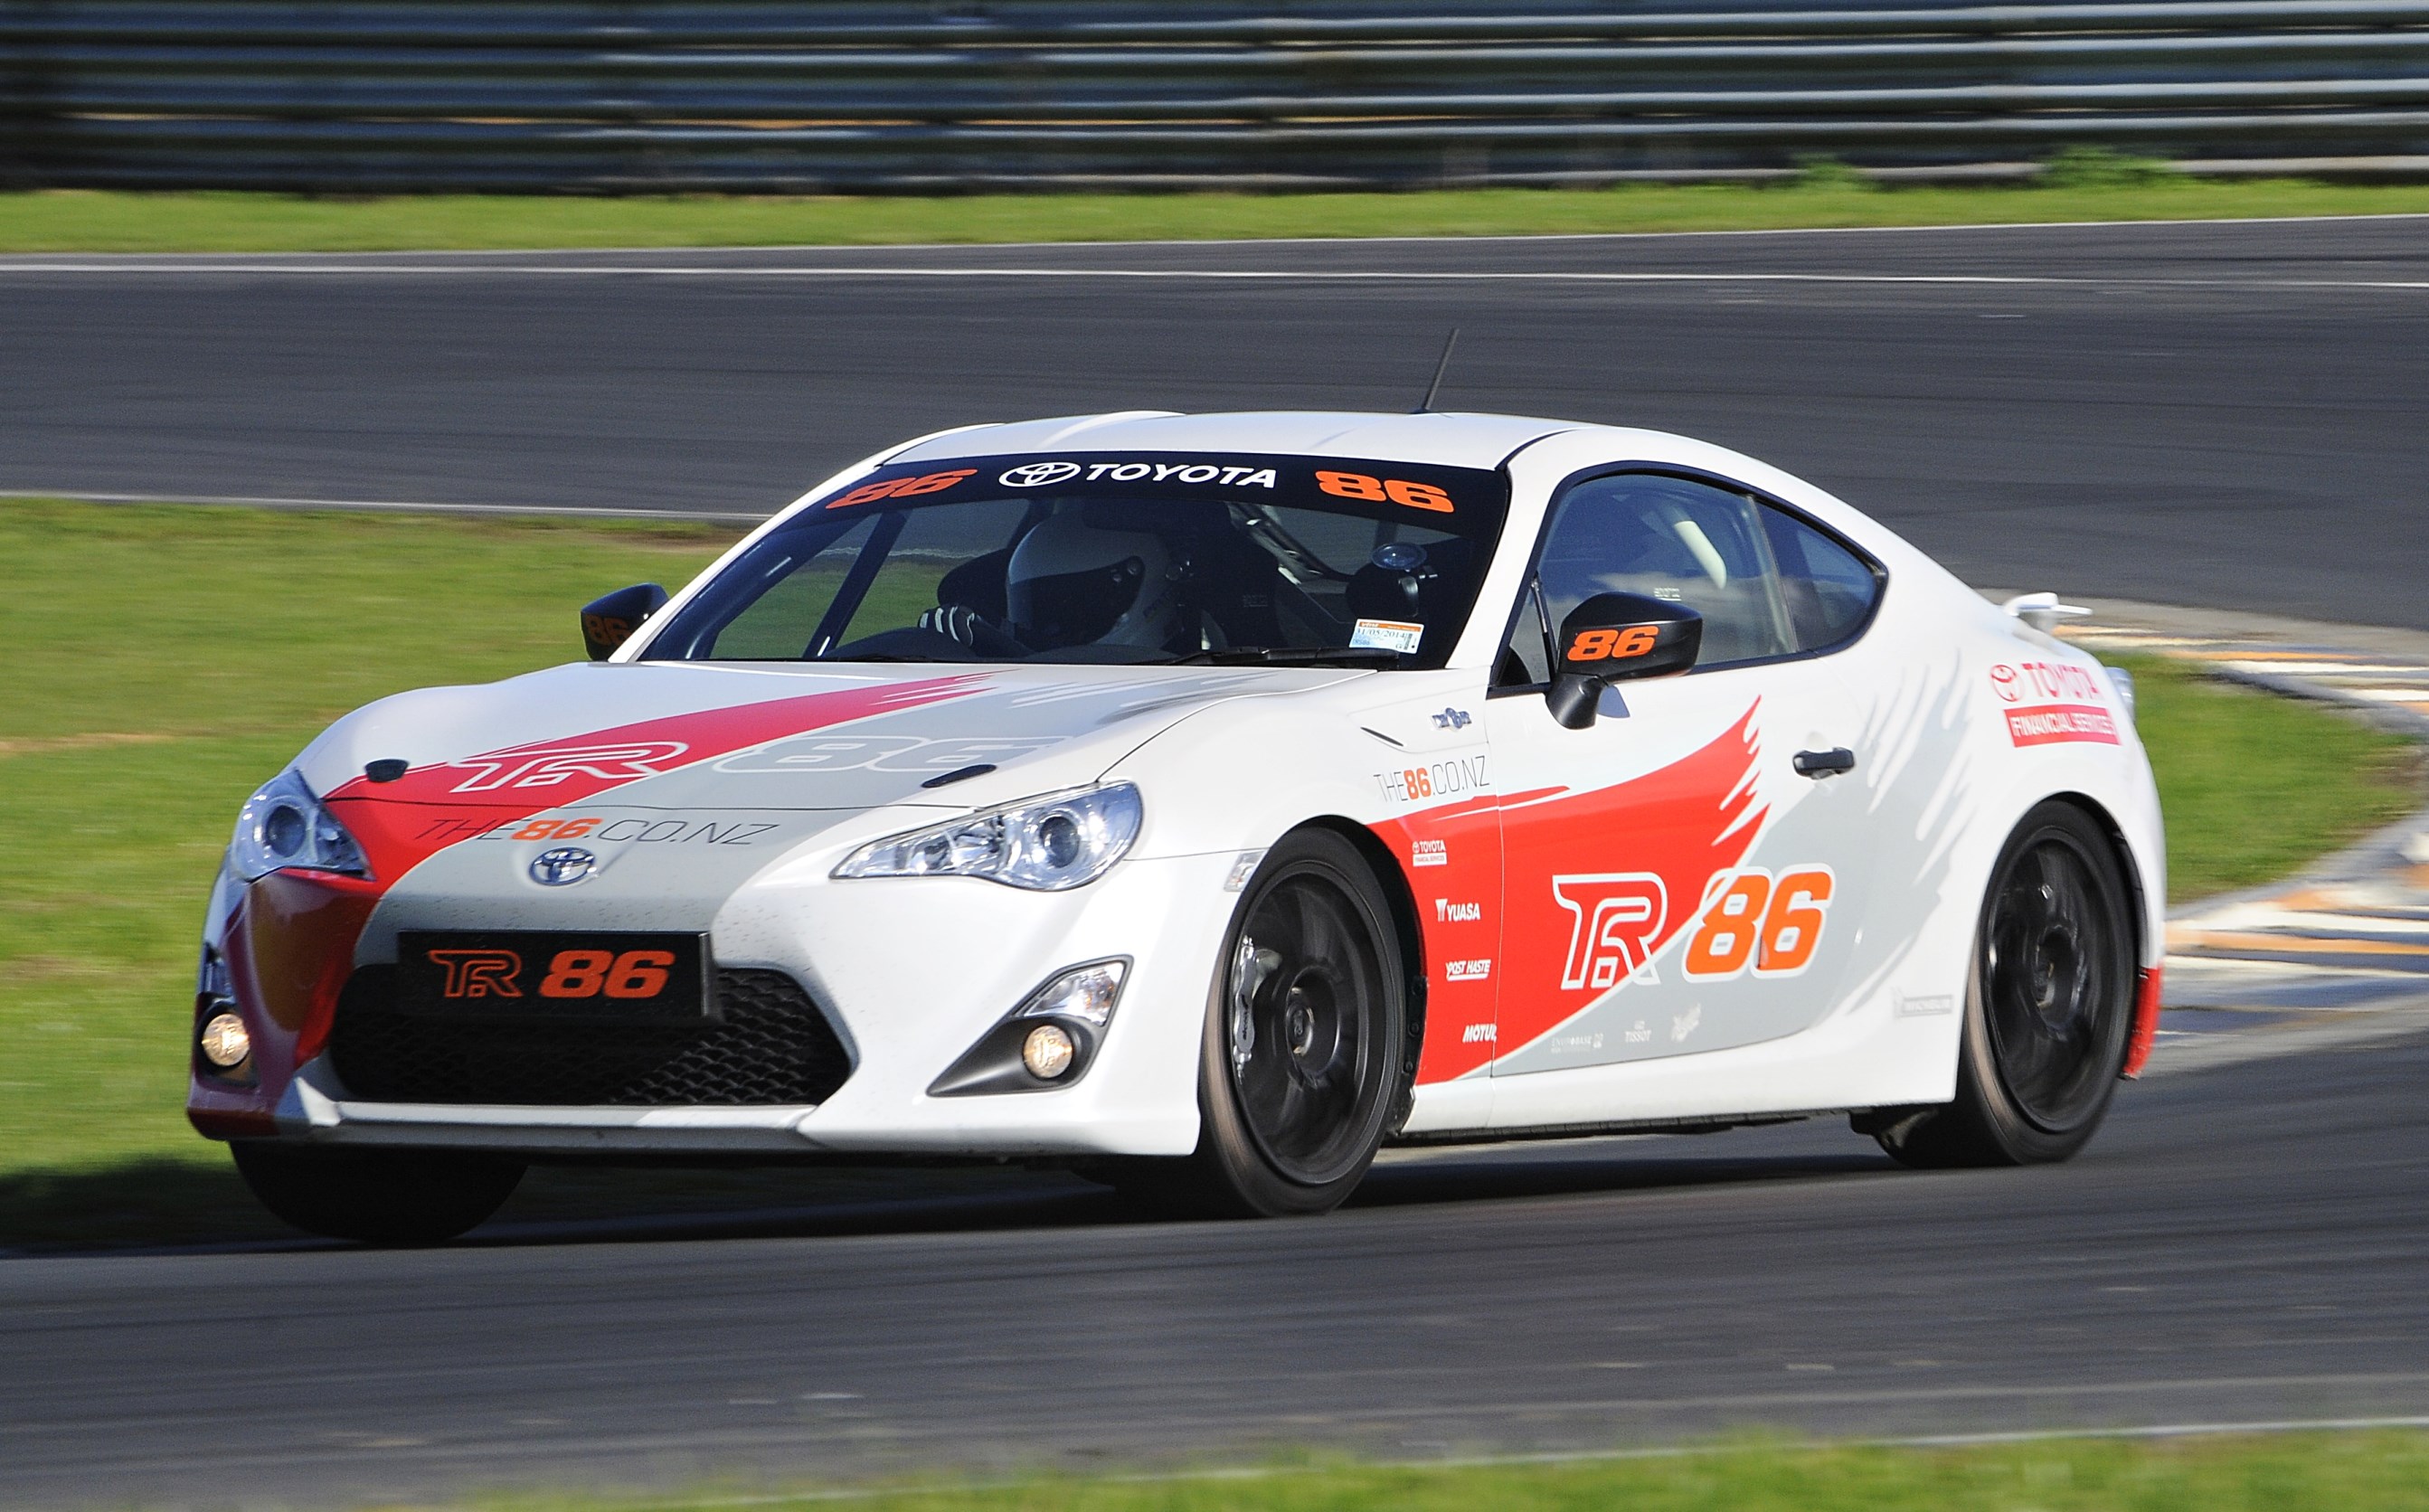 Toyota TR86 fever spreads to the NZRDL